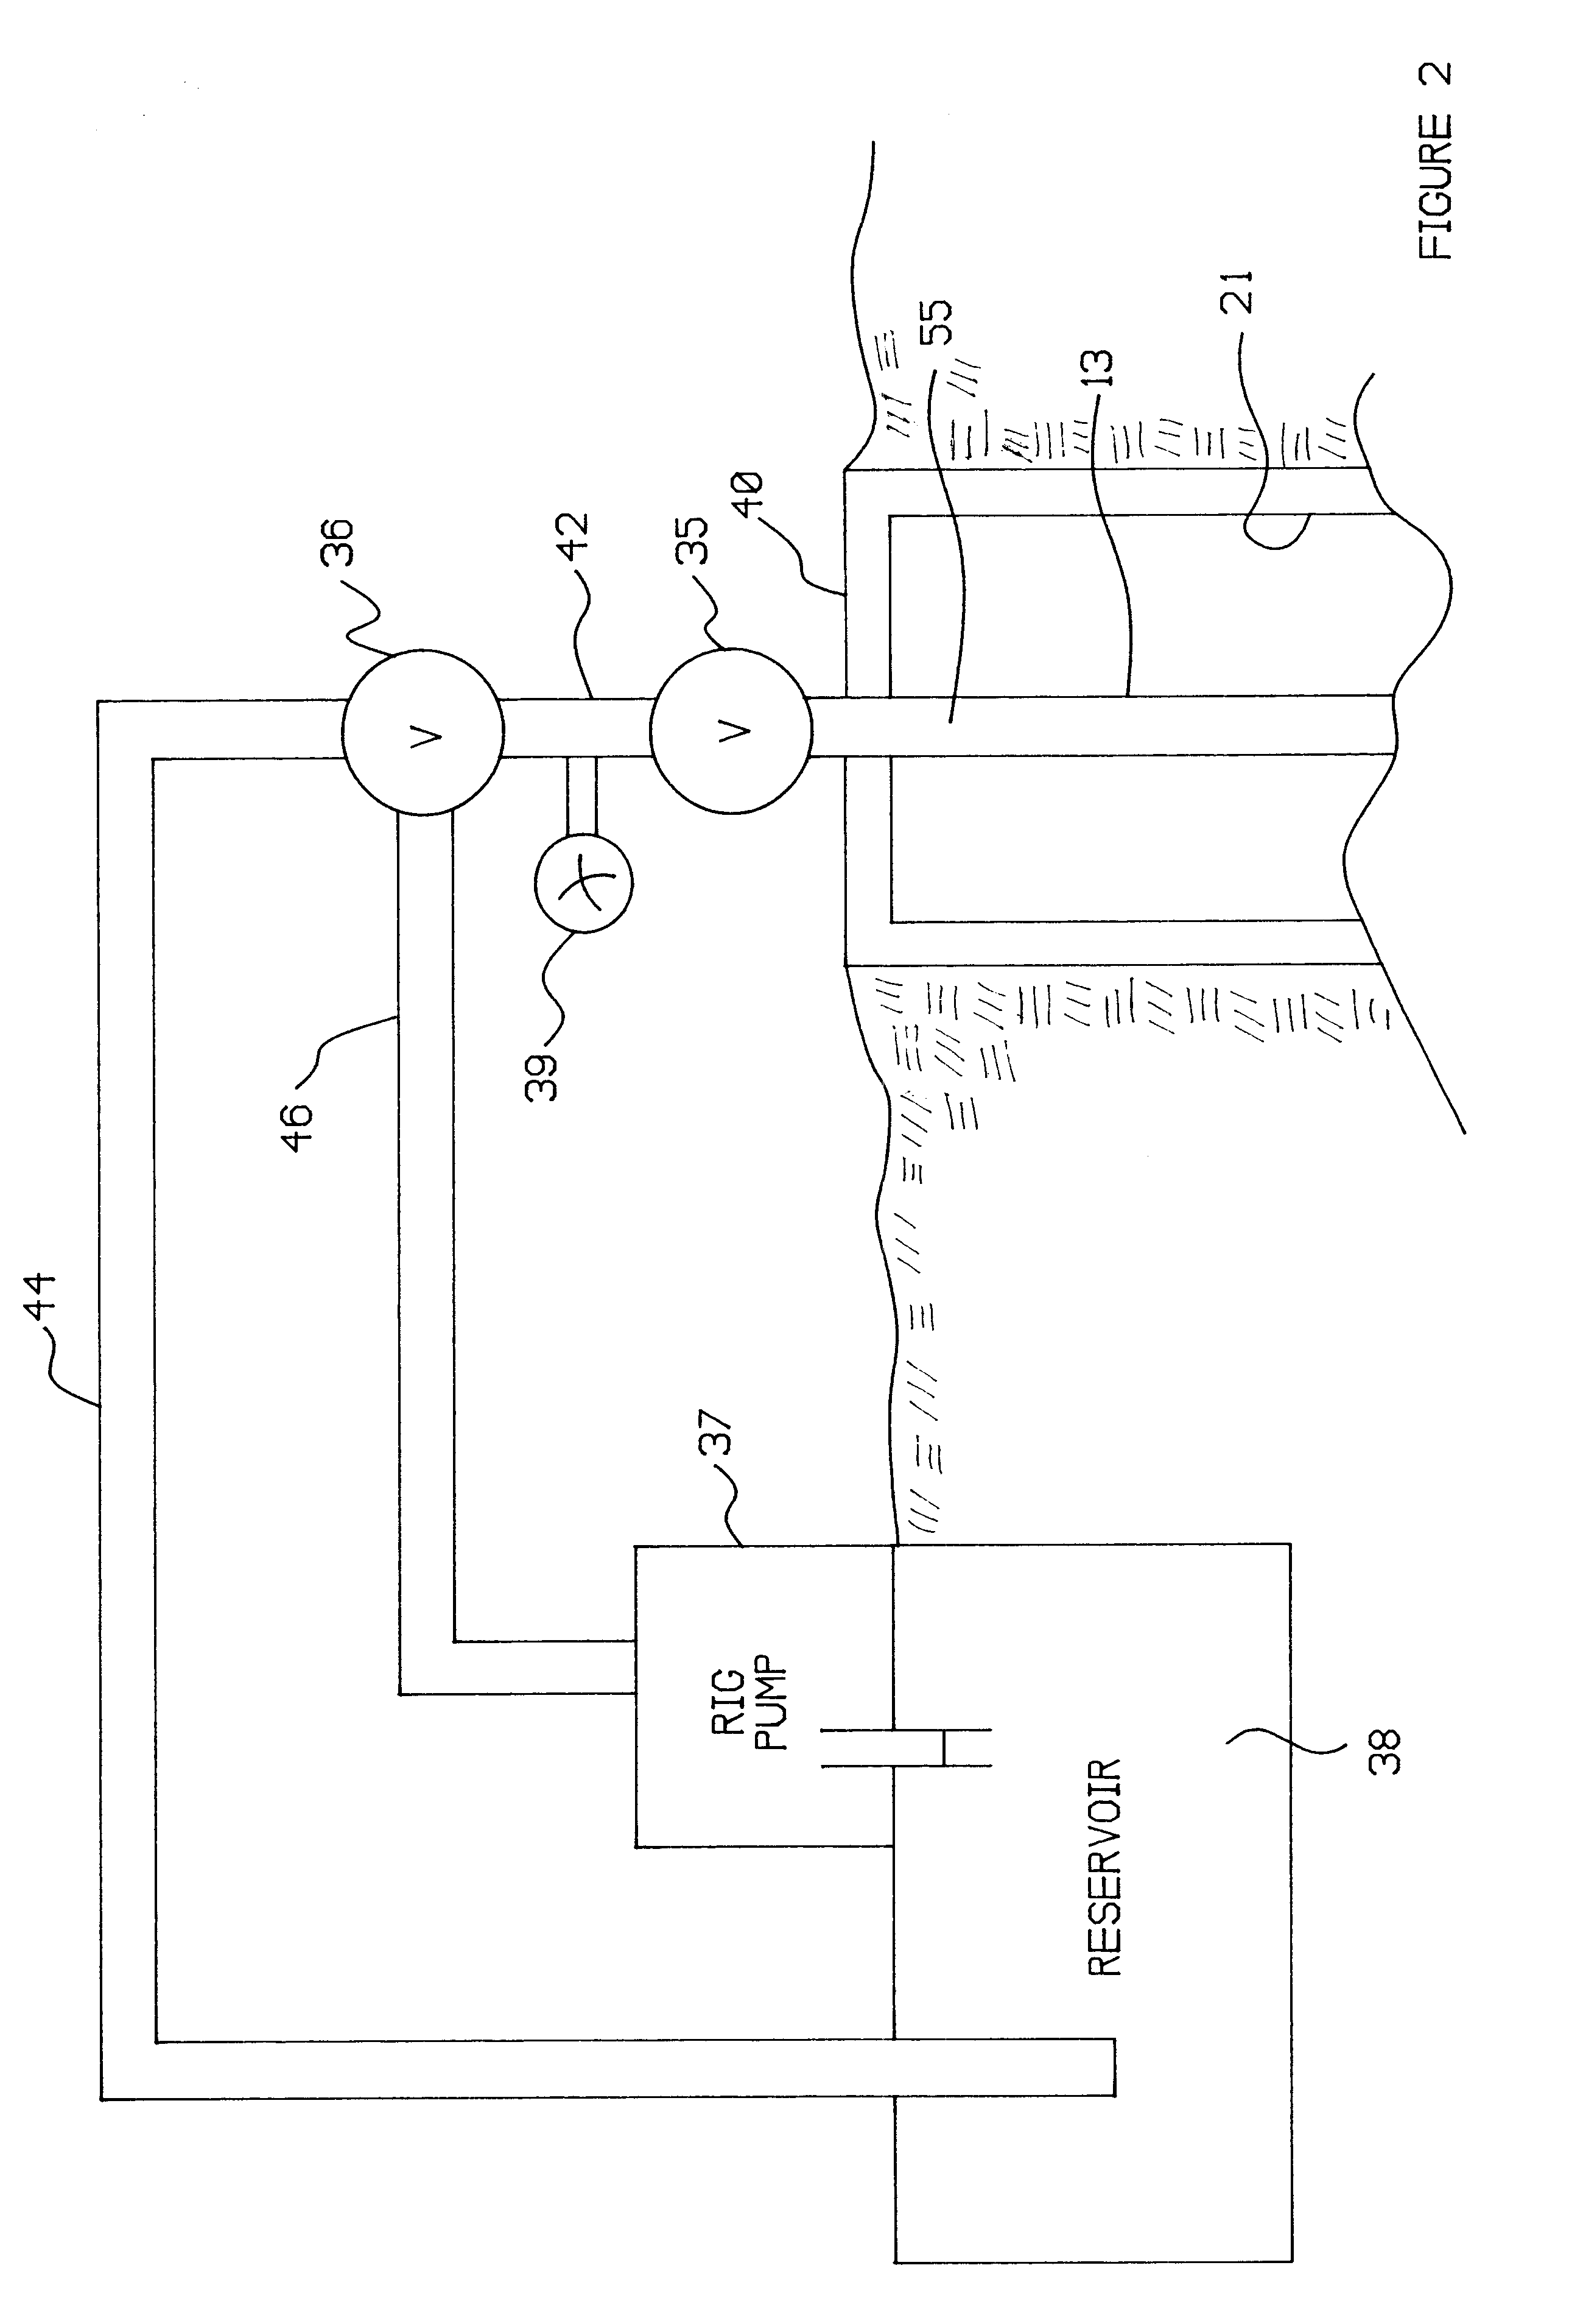 Method and apparatus for communicating coded messages in a wellbore